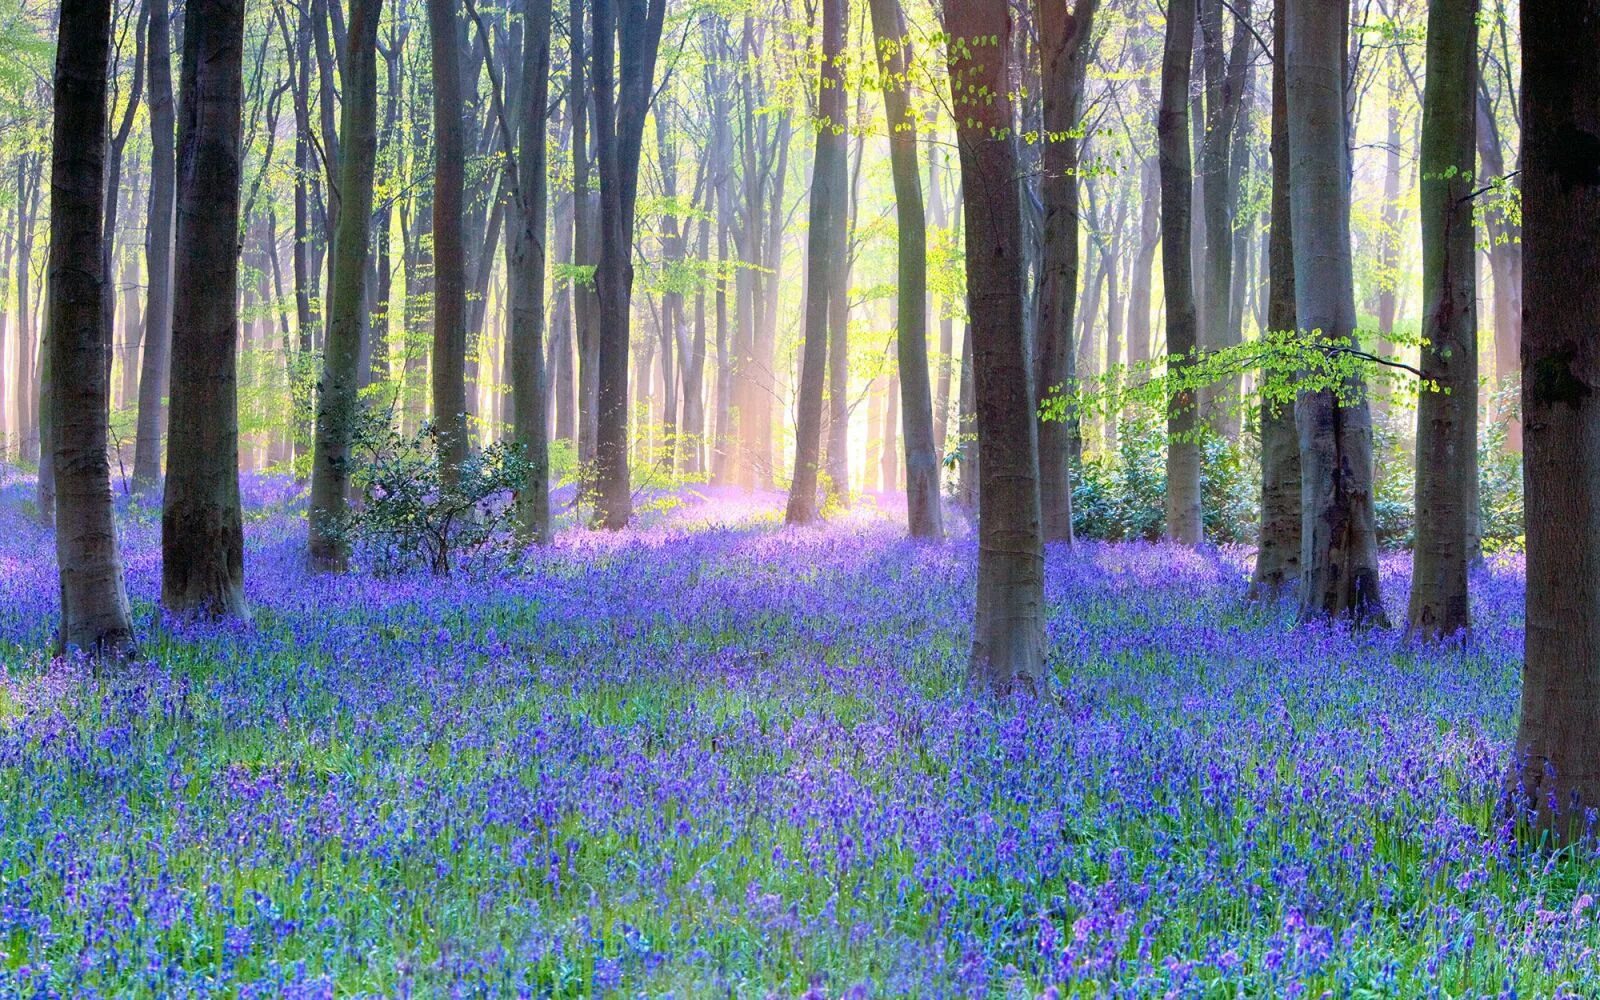 Bluebell Vision Doug Chinnery. Bluebell Forest место. Цветы Лаванда лес. Kinclave Bluebell Woods. See them beautiful